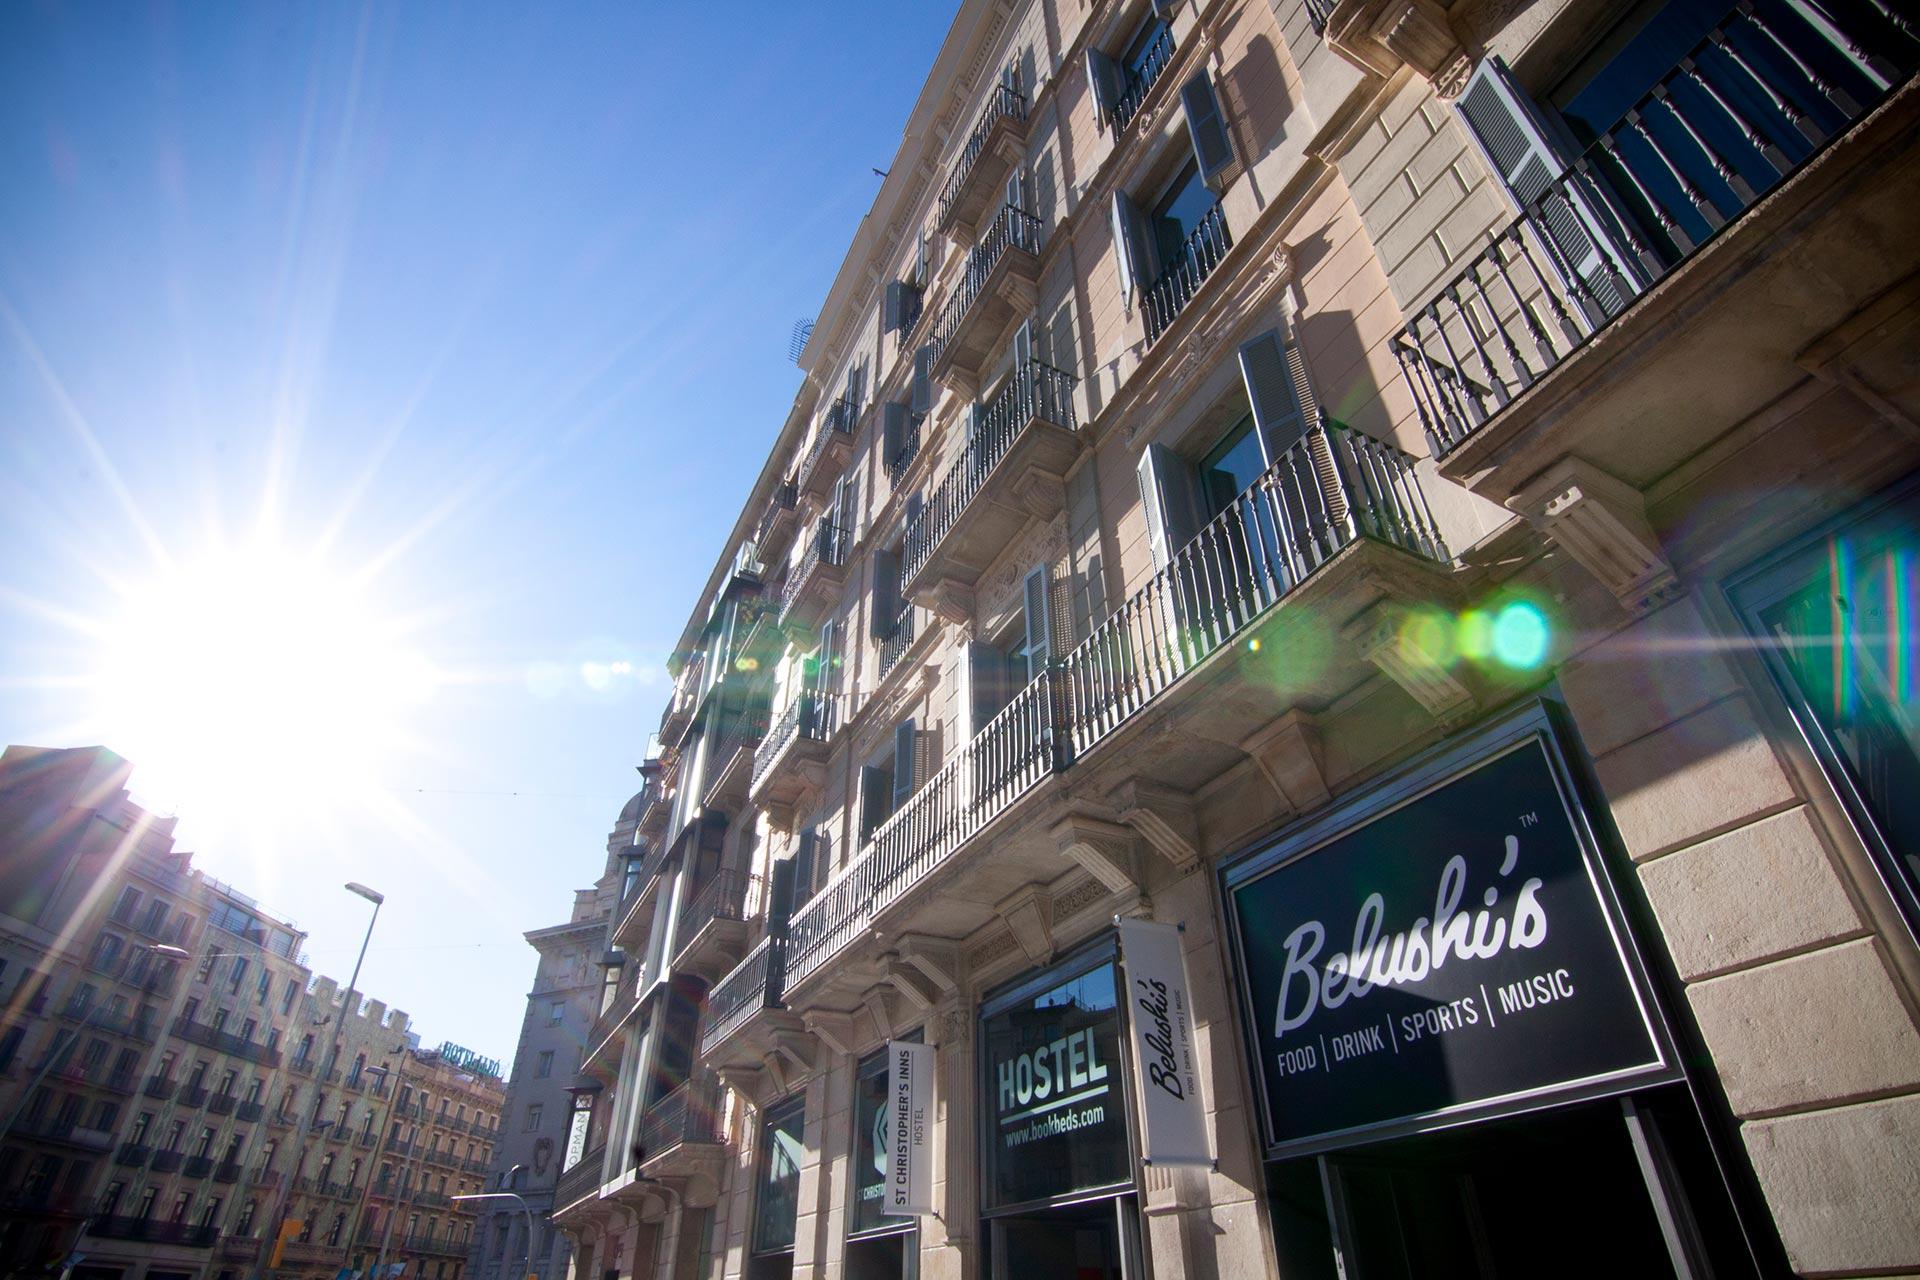 Accommodation in Barcelona